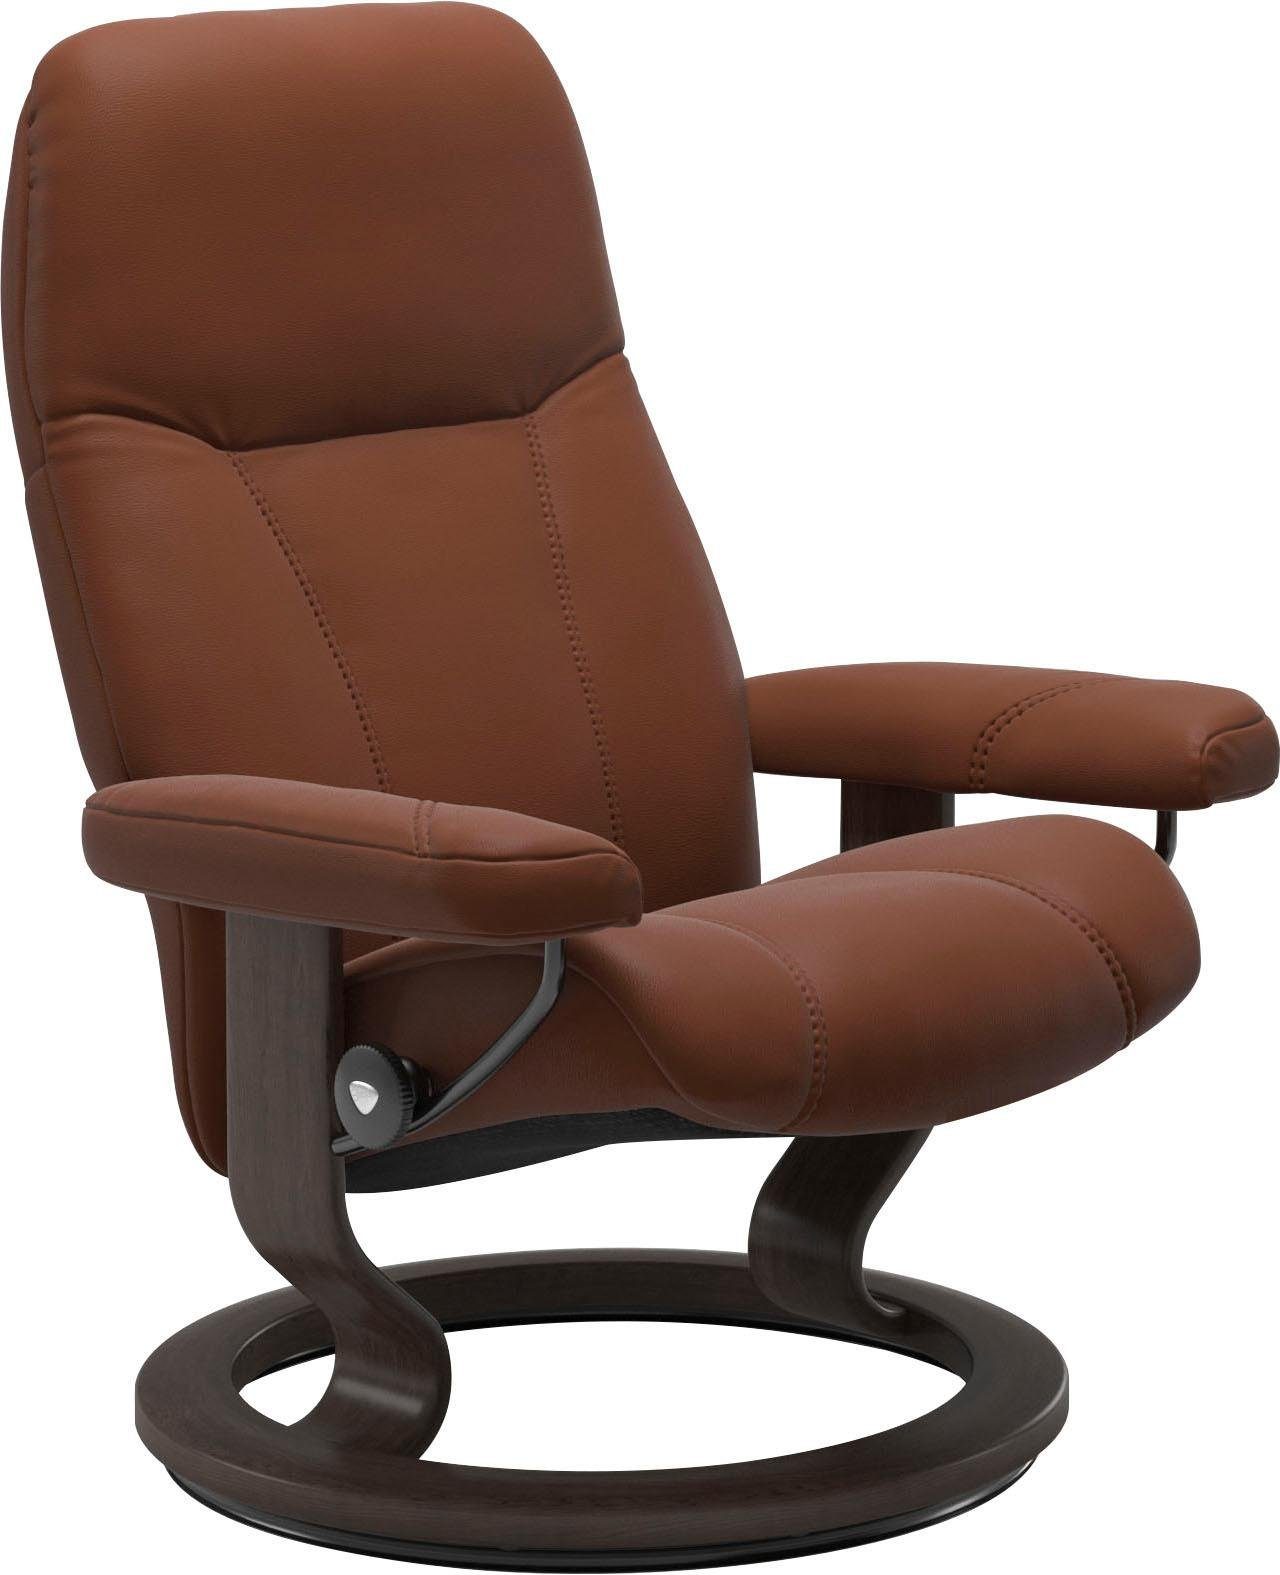 Wenge mit Classic Base, L, Größe Relaxsessel Stressless® Gestell Consul,